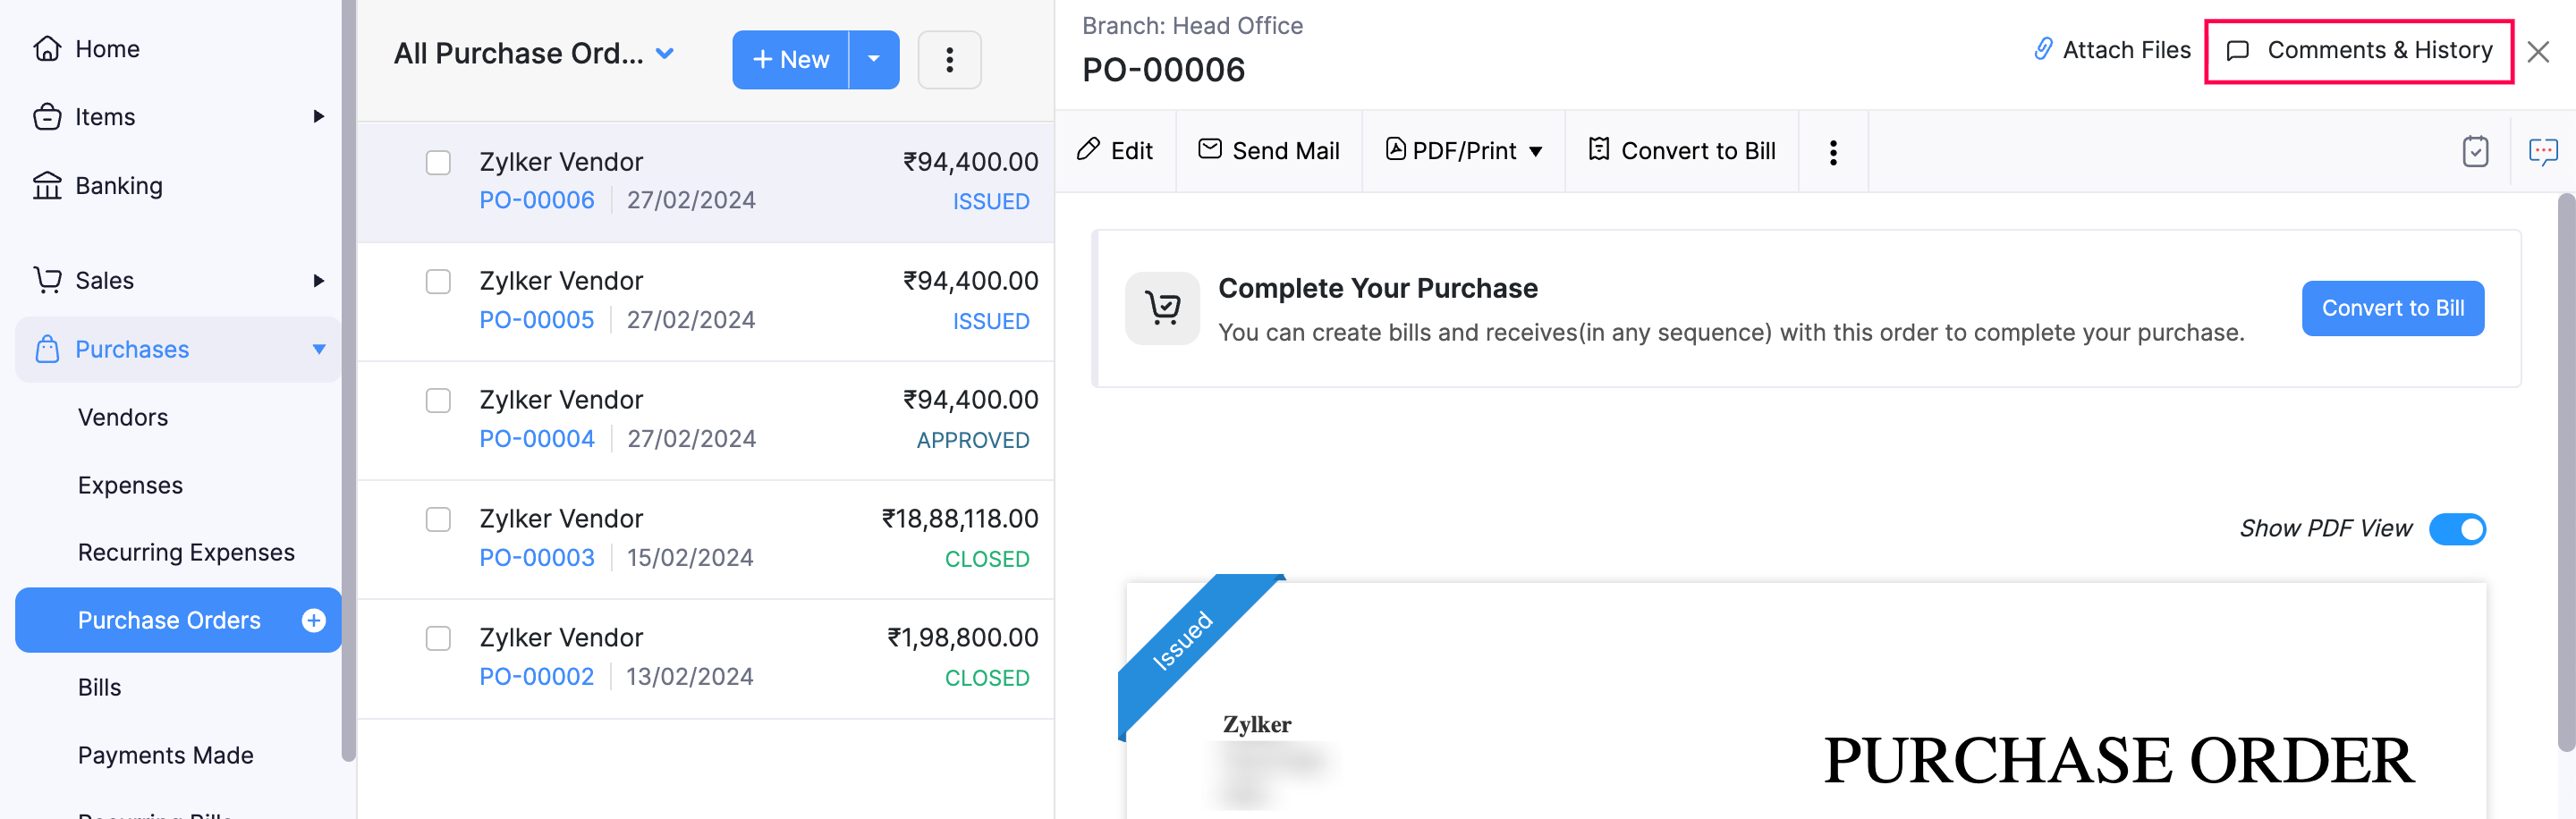 Comments & History button in a purchase order in Zoho Books